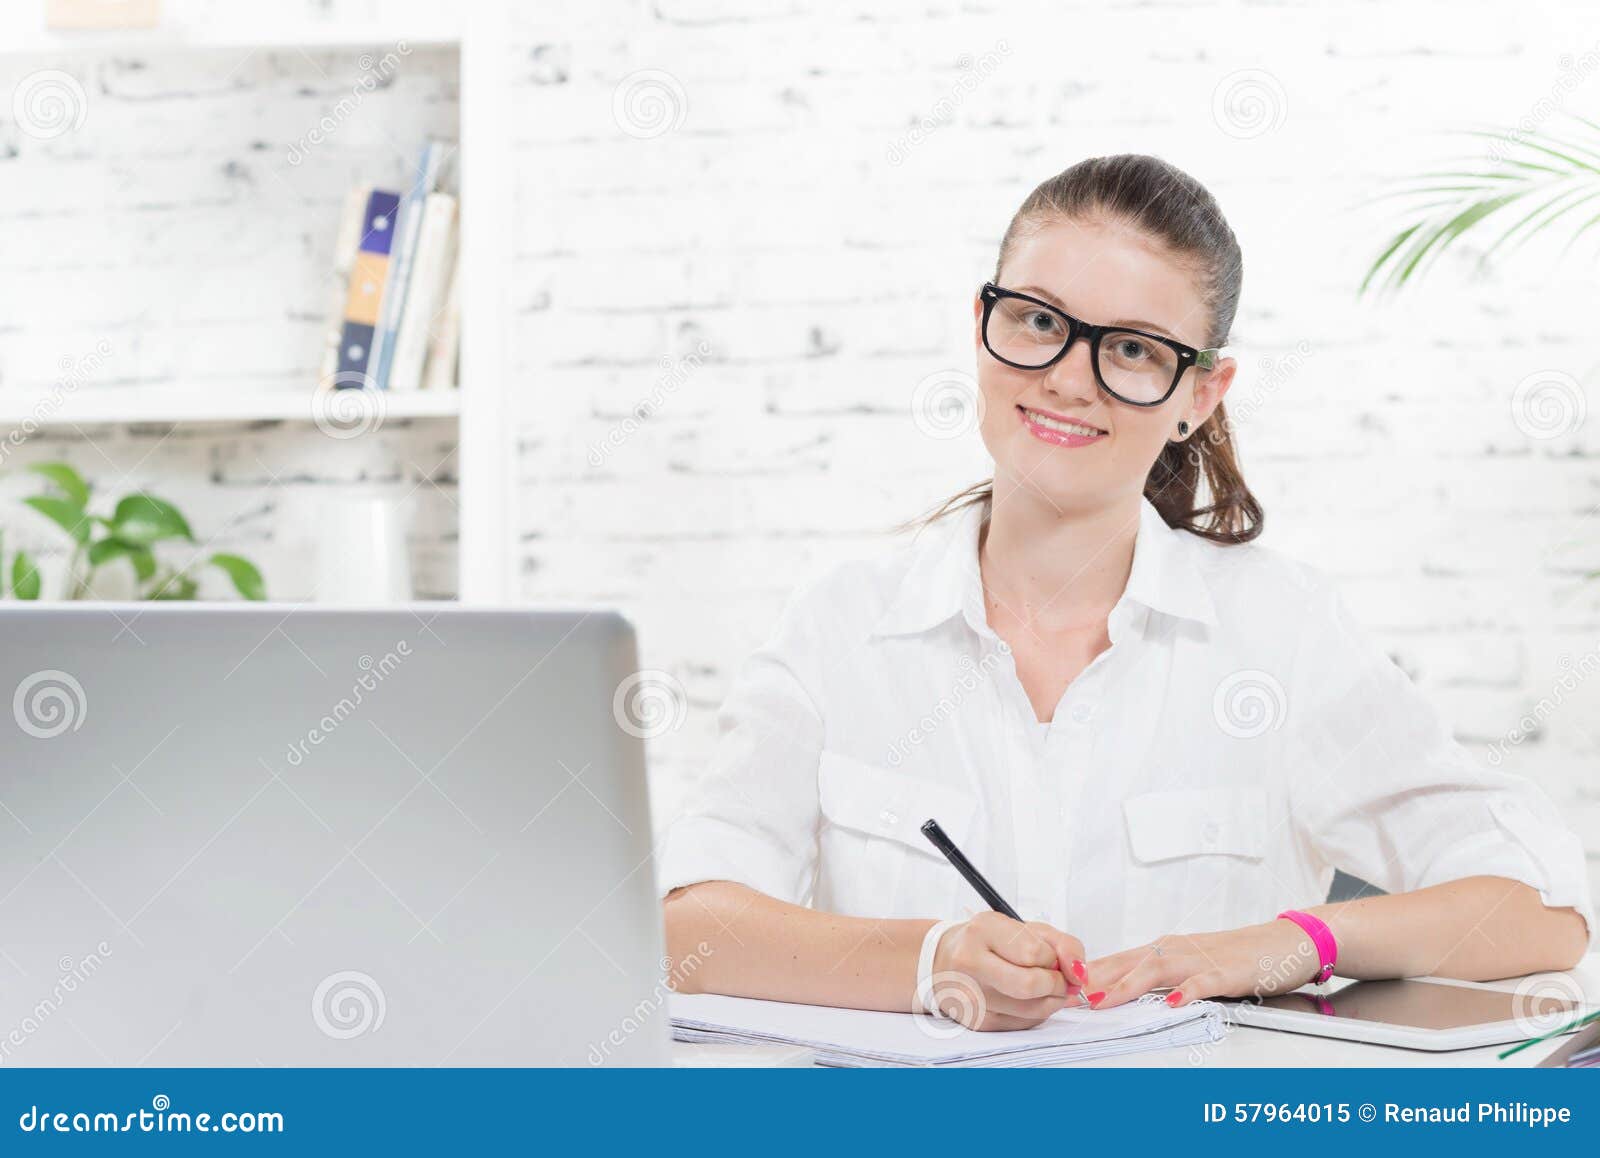 Pretty young secretary stock image. Image of young, corporate - 57964015